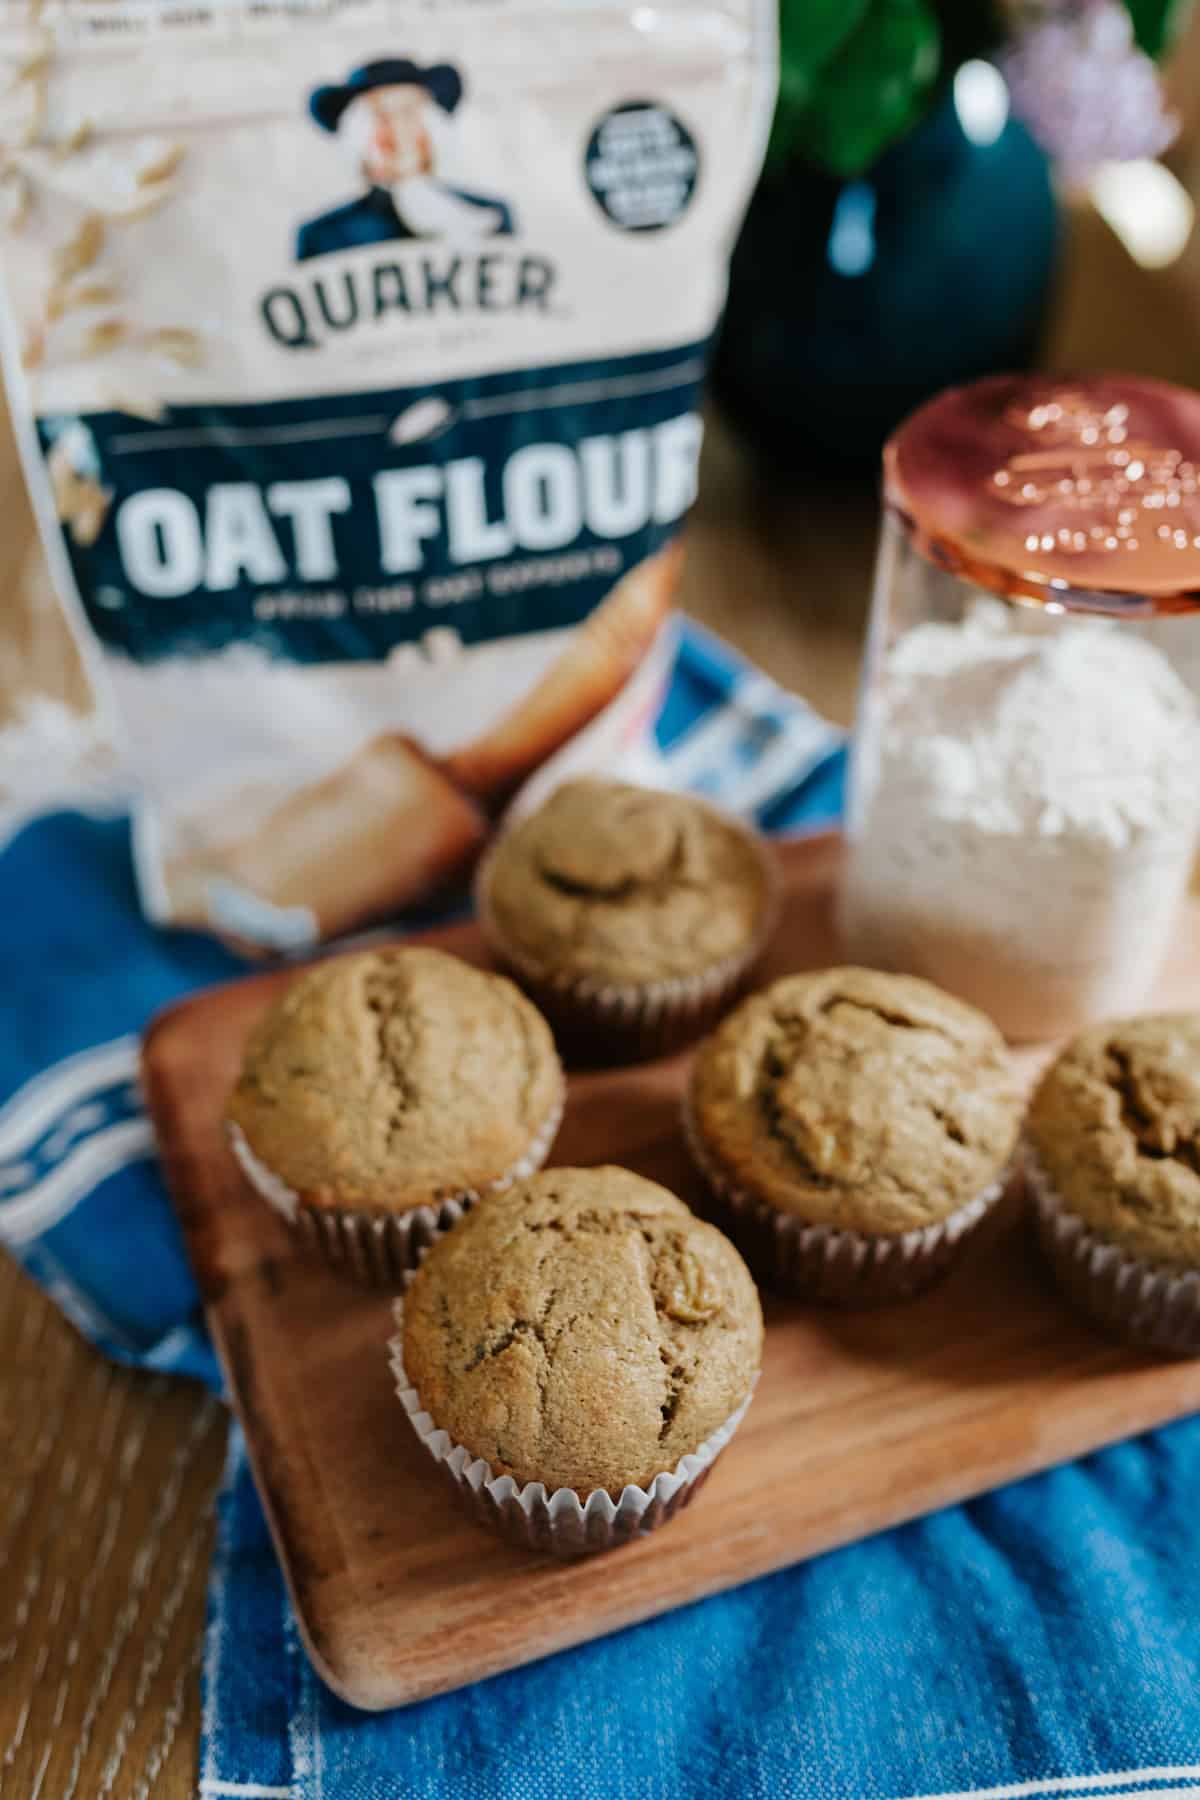 5 banana muffins on a cutting board with a bag of quaker oat flour in the background.